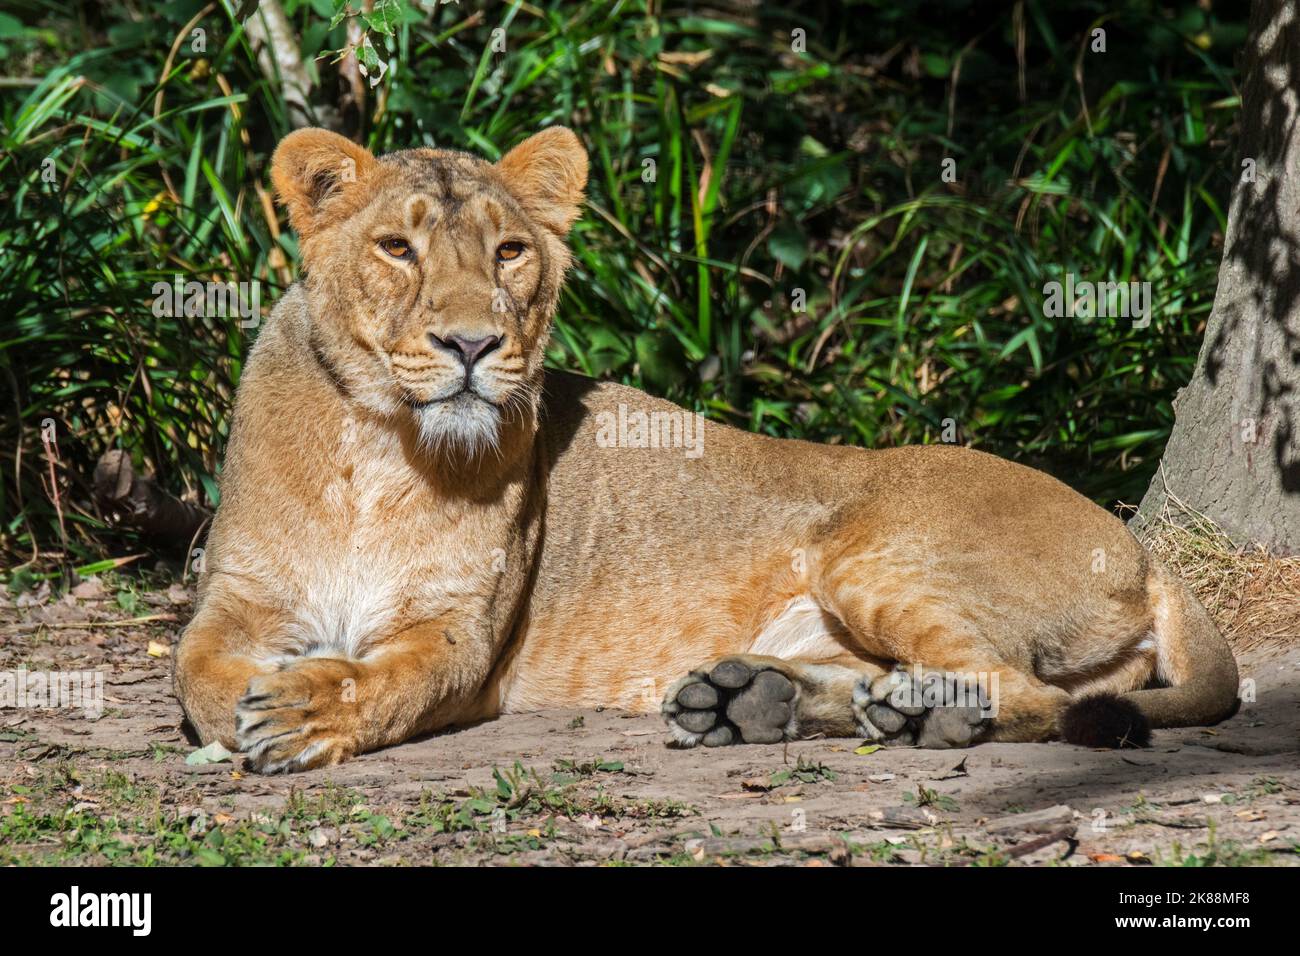 Asiatic lion / Gir lion (Panthera leo persica) resting lioness / female, native to India Stock Photo